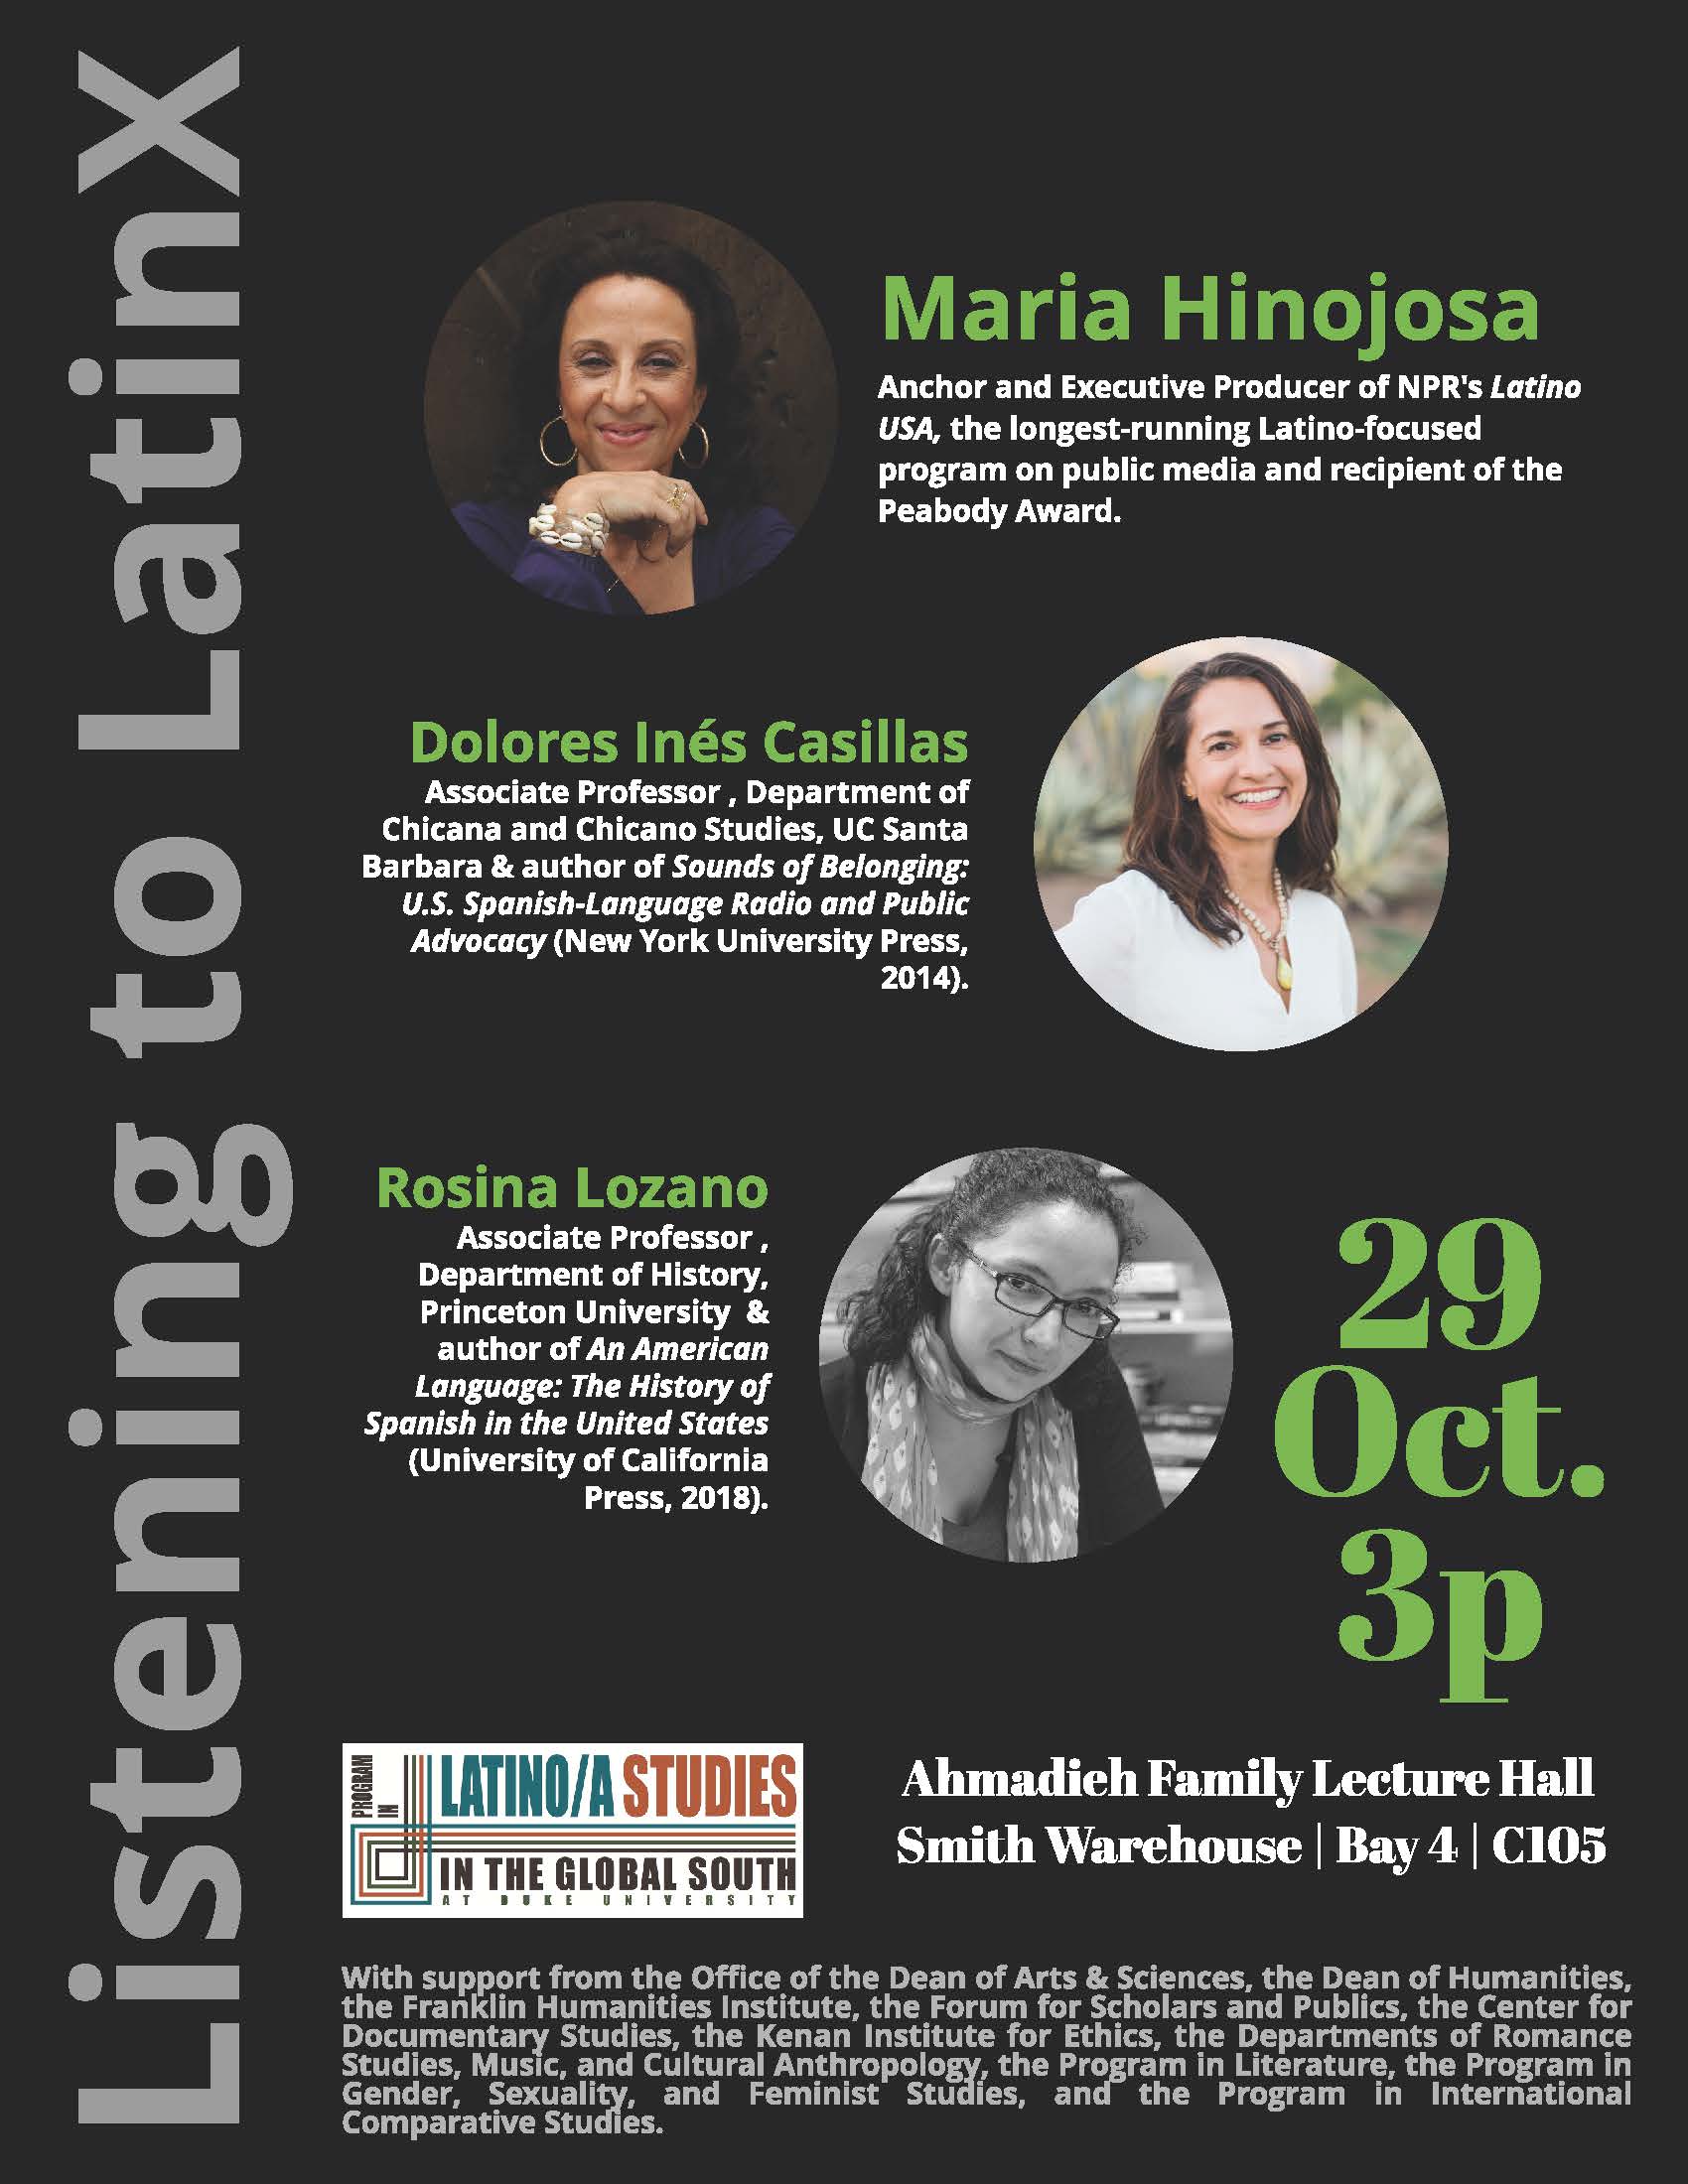 Listening to LatinX Poster: Owning Your Voice Maria Hinojosa Anchor and executive producer of NPR's Latino USA Listening to Advocacy on Contemporary U.S. Spanish-Language Radio Dolores Inés Casillas Department of Chicano and Chicana Studies University of California, Santa Barbara An American Language: The History of Spanish in the United States Rosina Lozano Department of History Princeton University